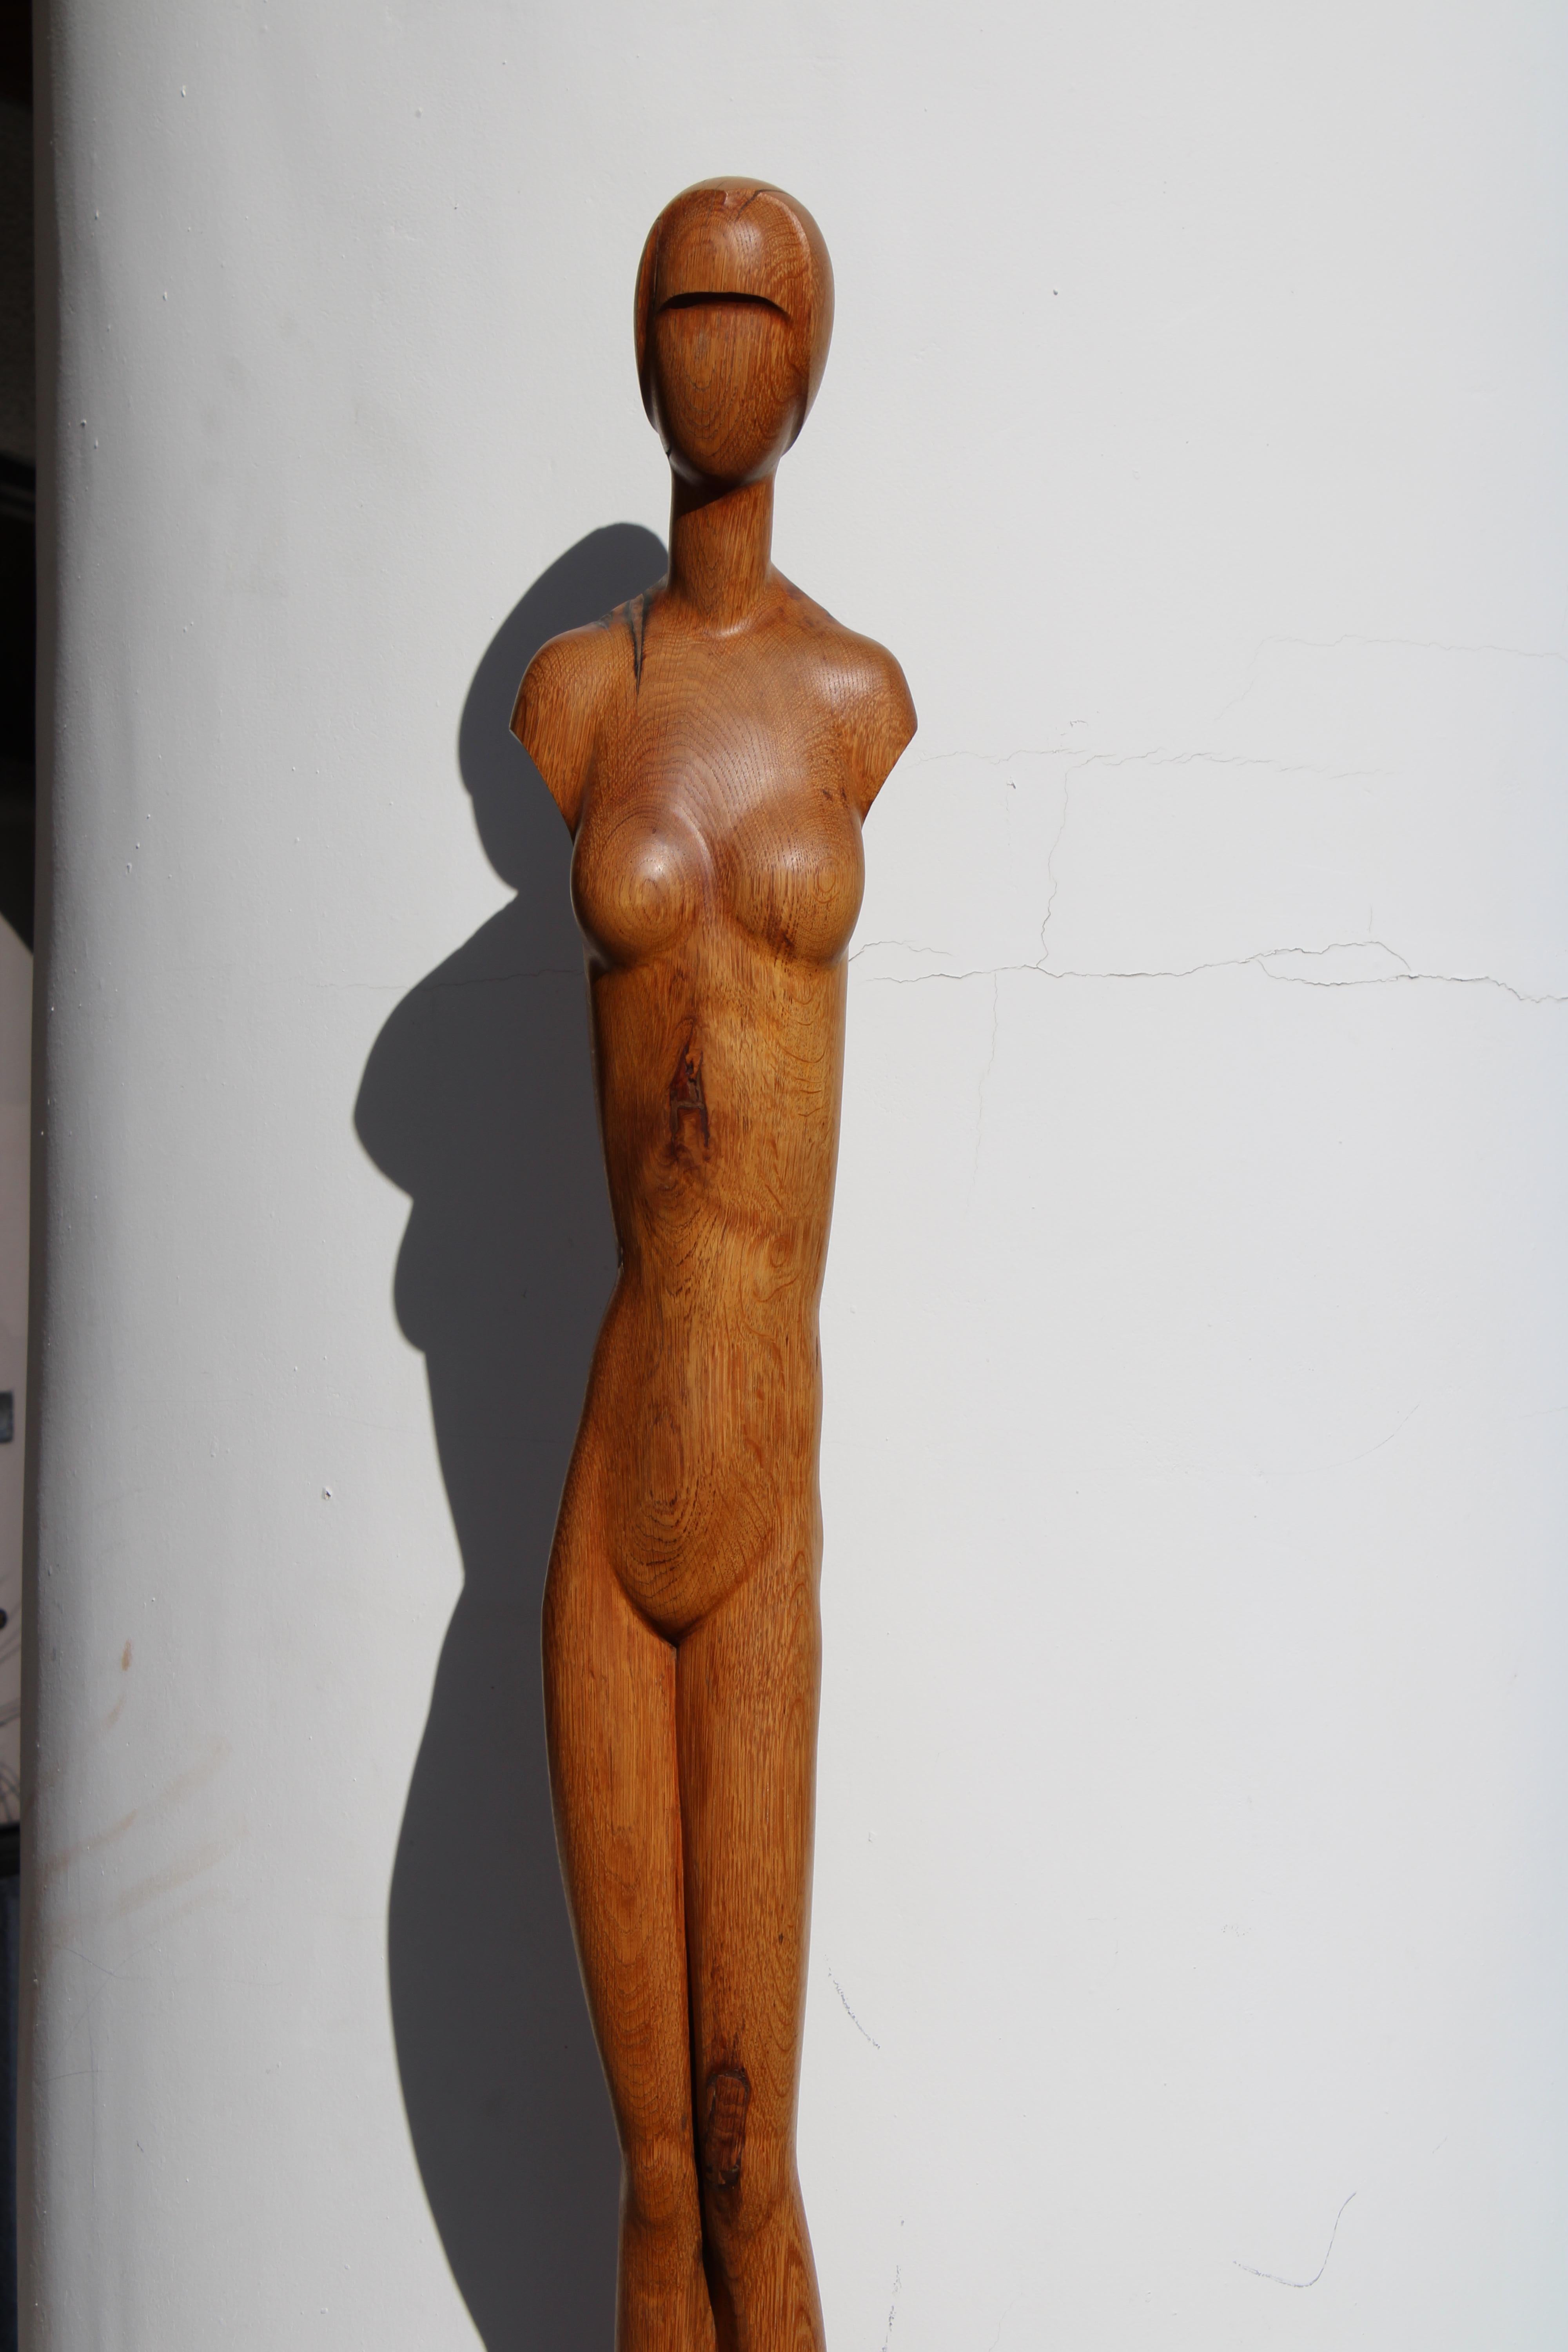 Monumental six foot Art Deco wood sculpture of a woman.  We cannot find any signature but, what a statement.  We were told this piece was made in Europe, possibly Belgium or France.  Total measurement of sculpture is 7